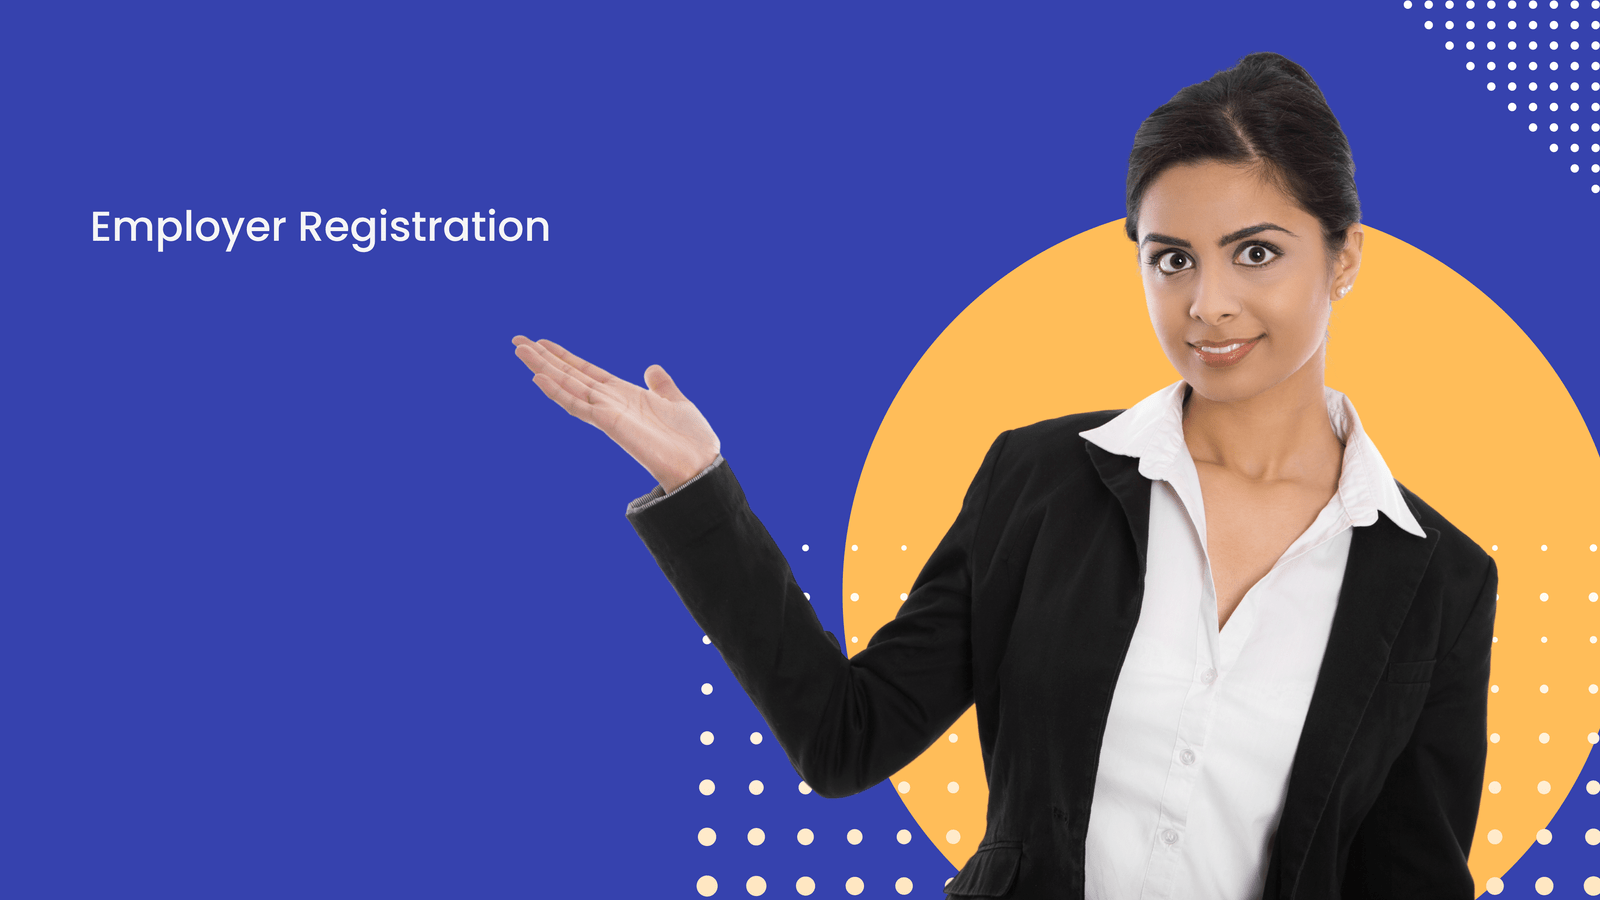 An employer pointing to register